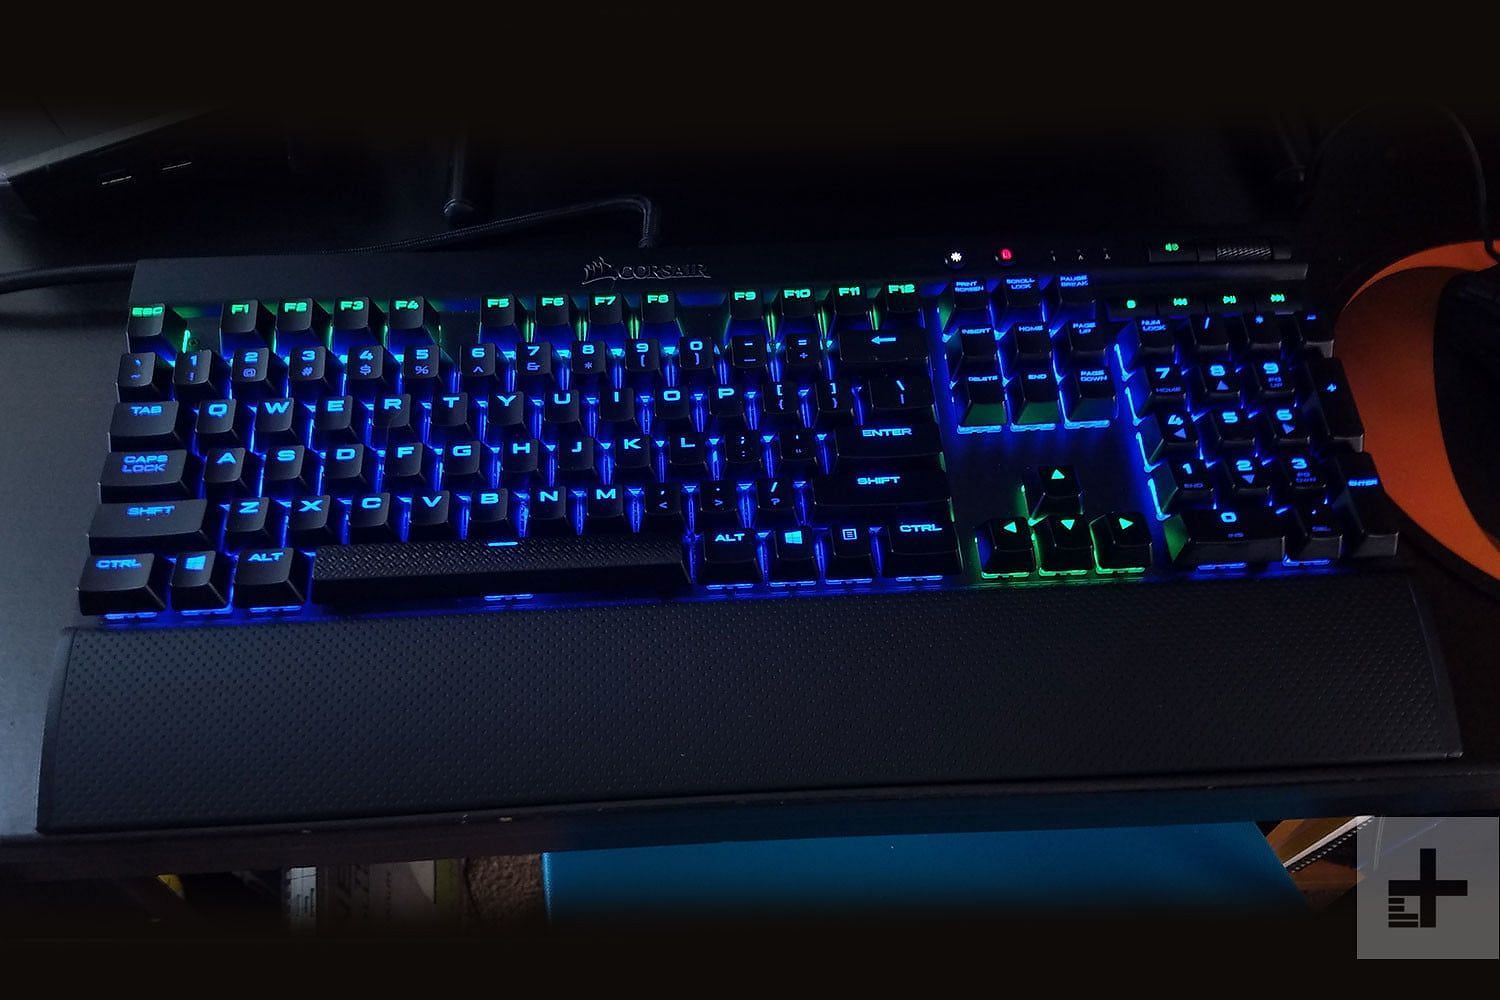 The rapidfire variant comes with a low-profile gaming keyboard version (Image via Digital Trends)